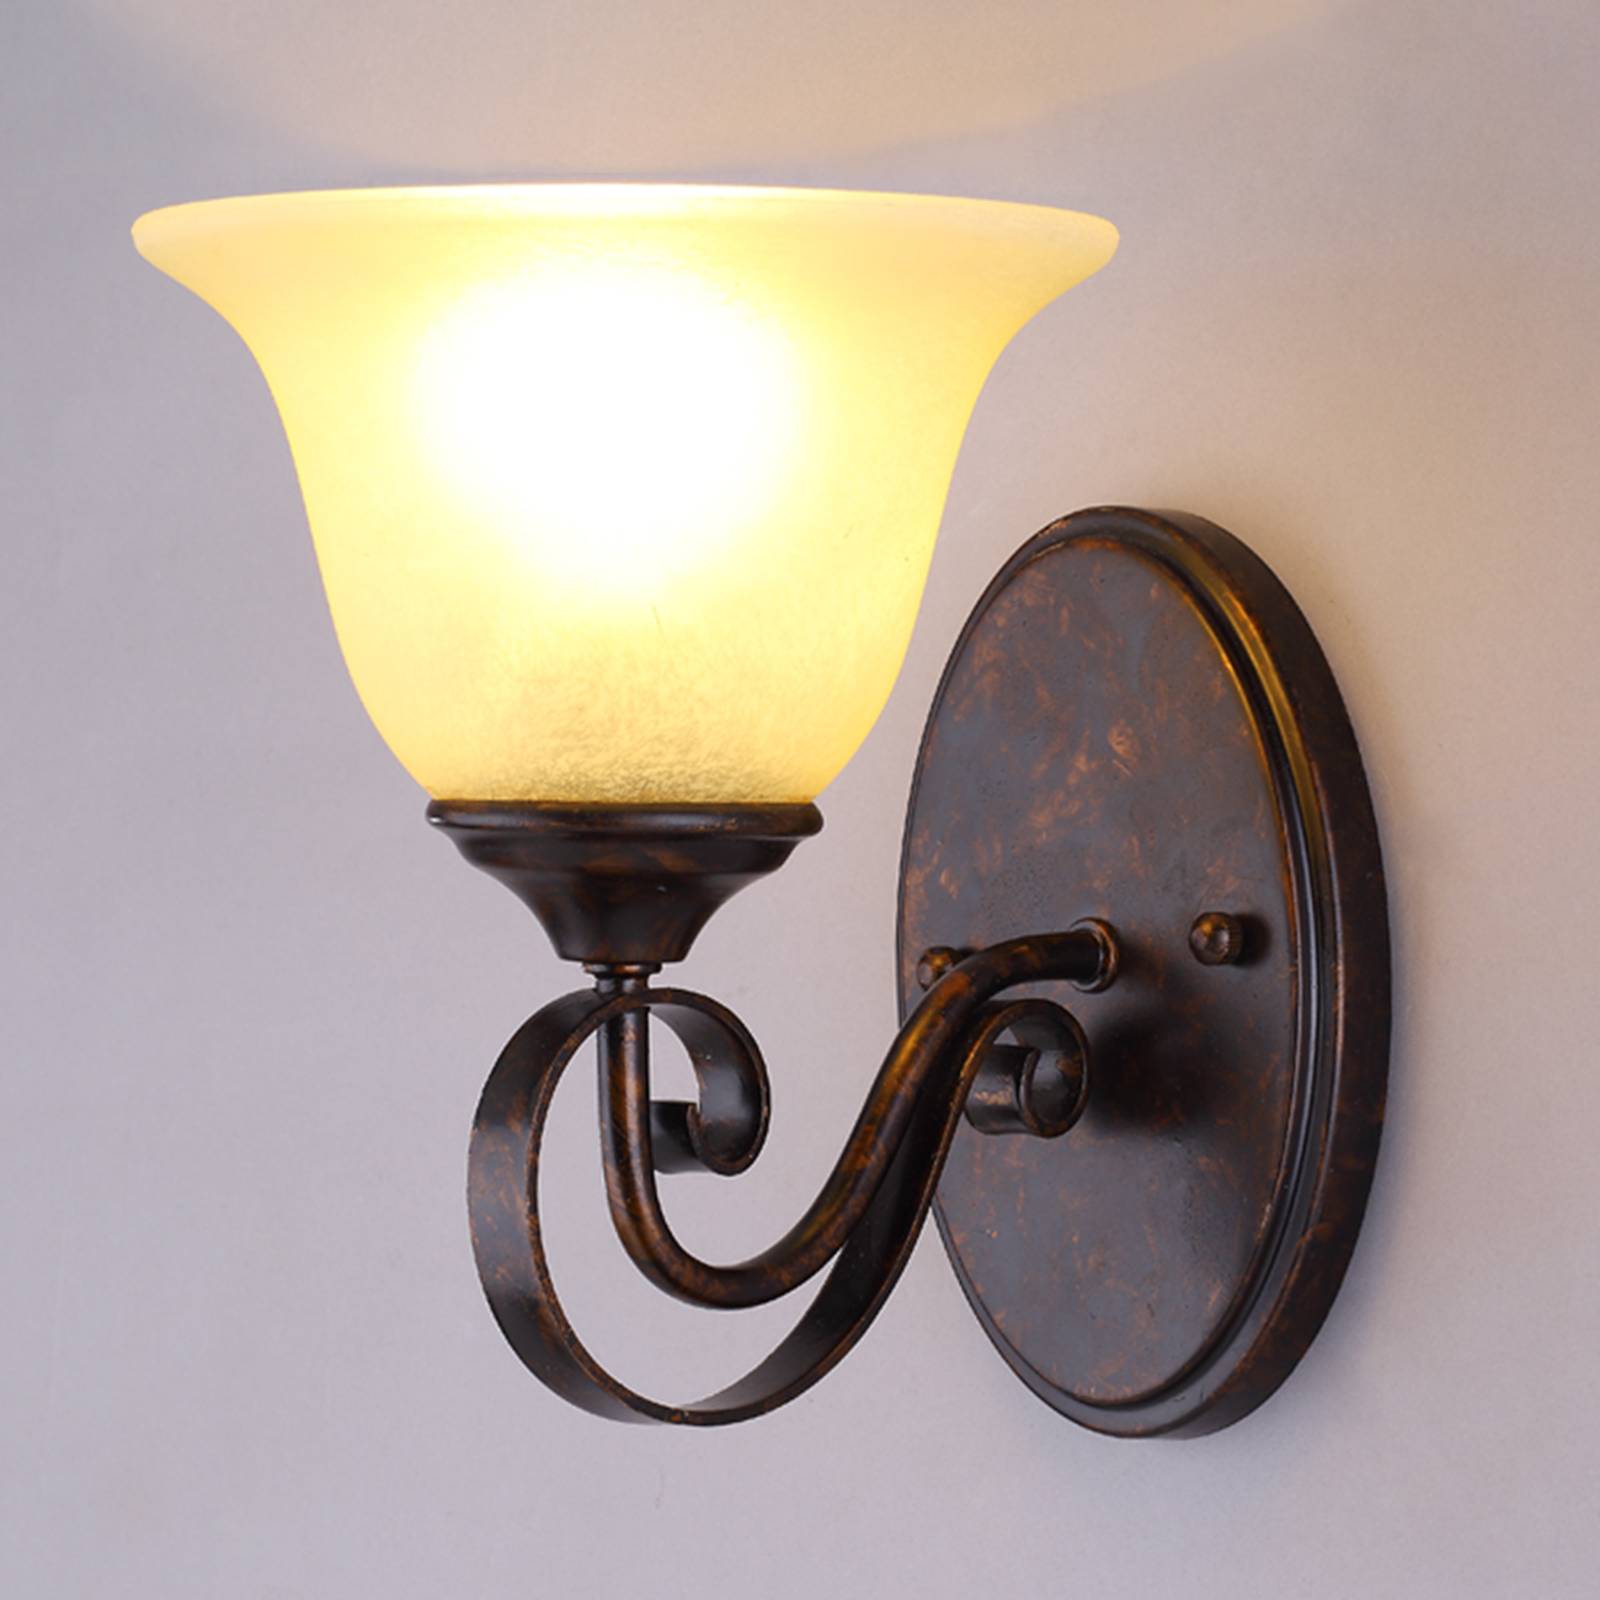 Wall lamp Svera in a country house style